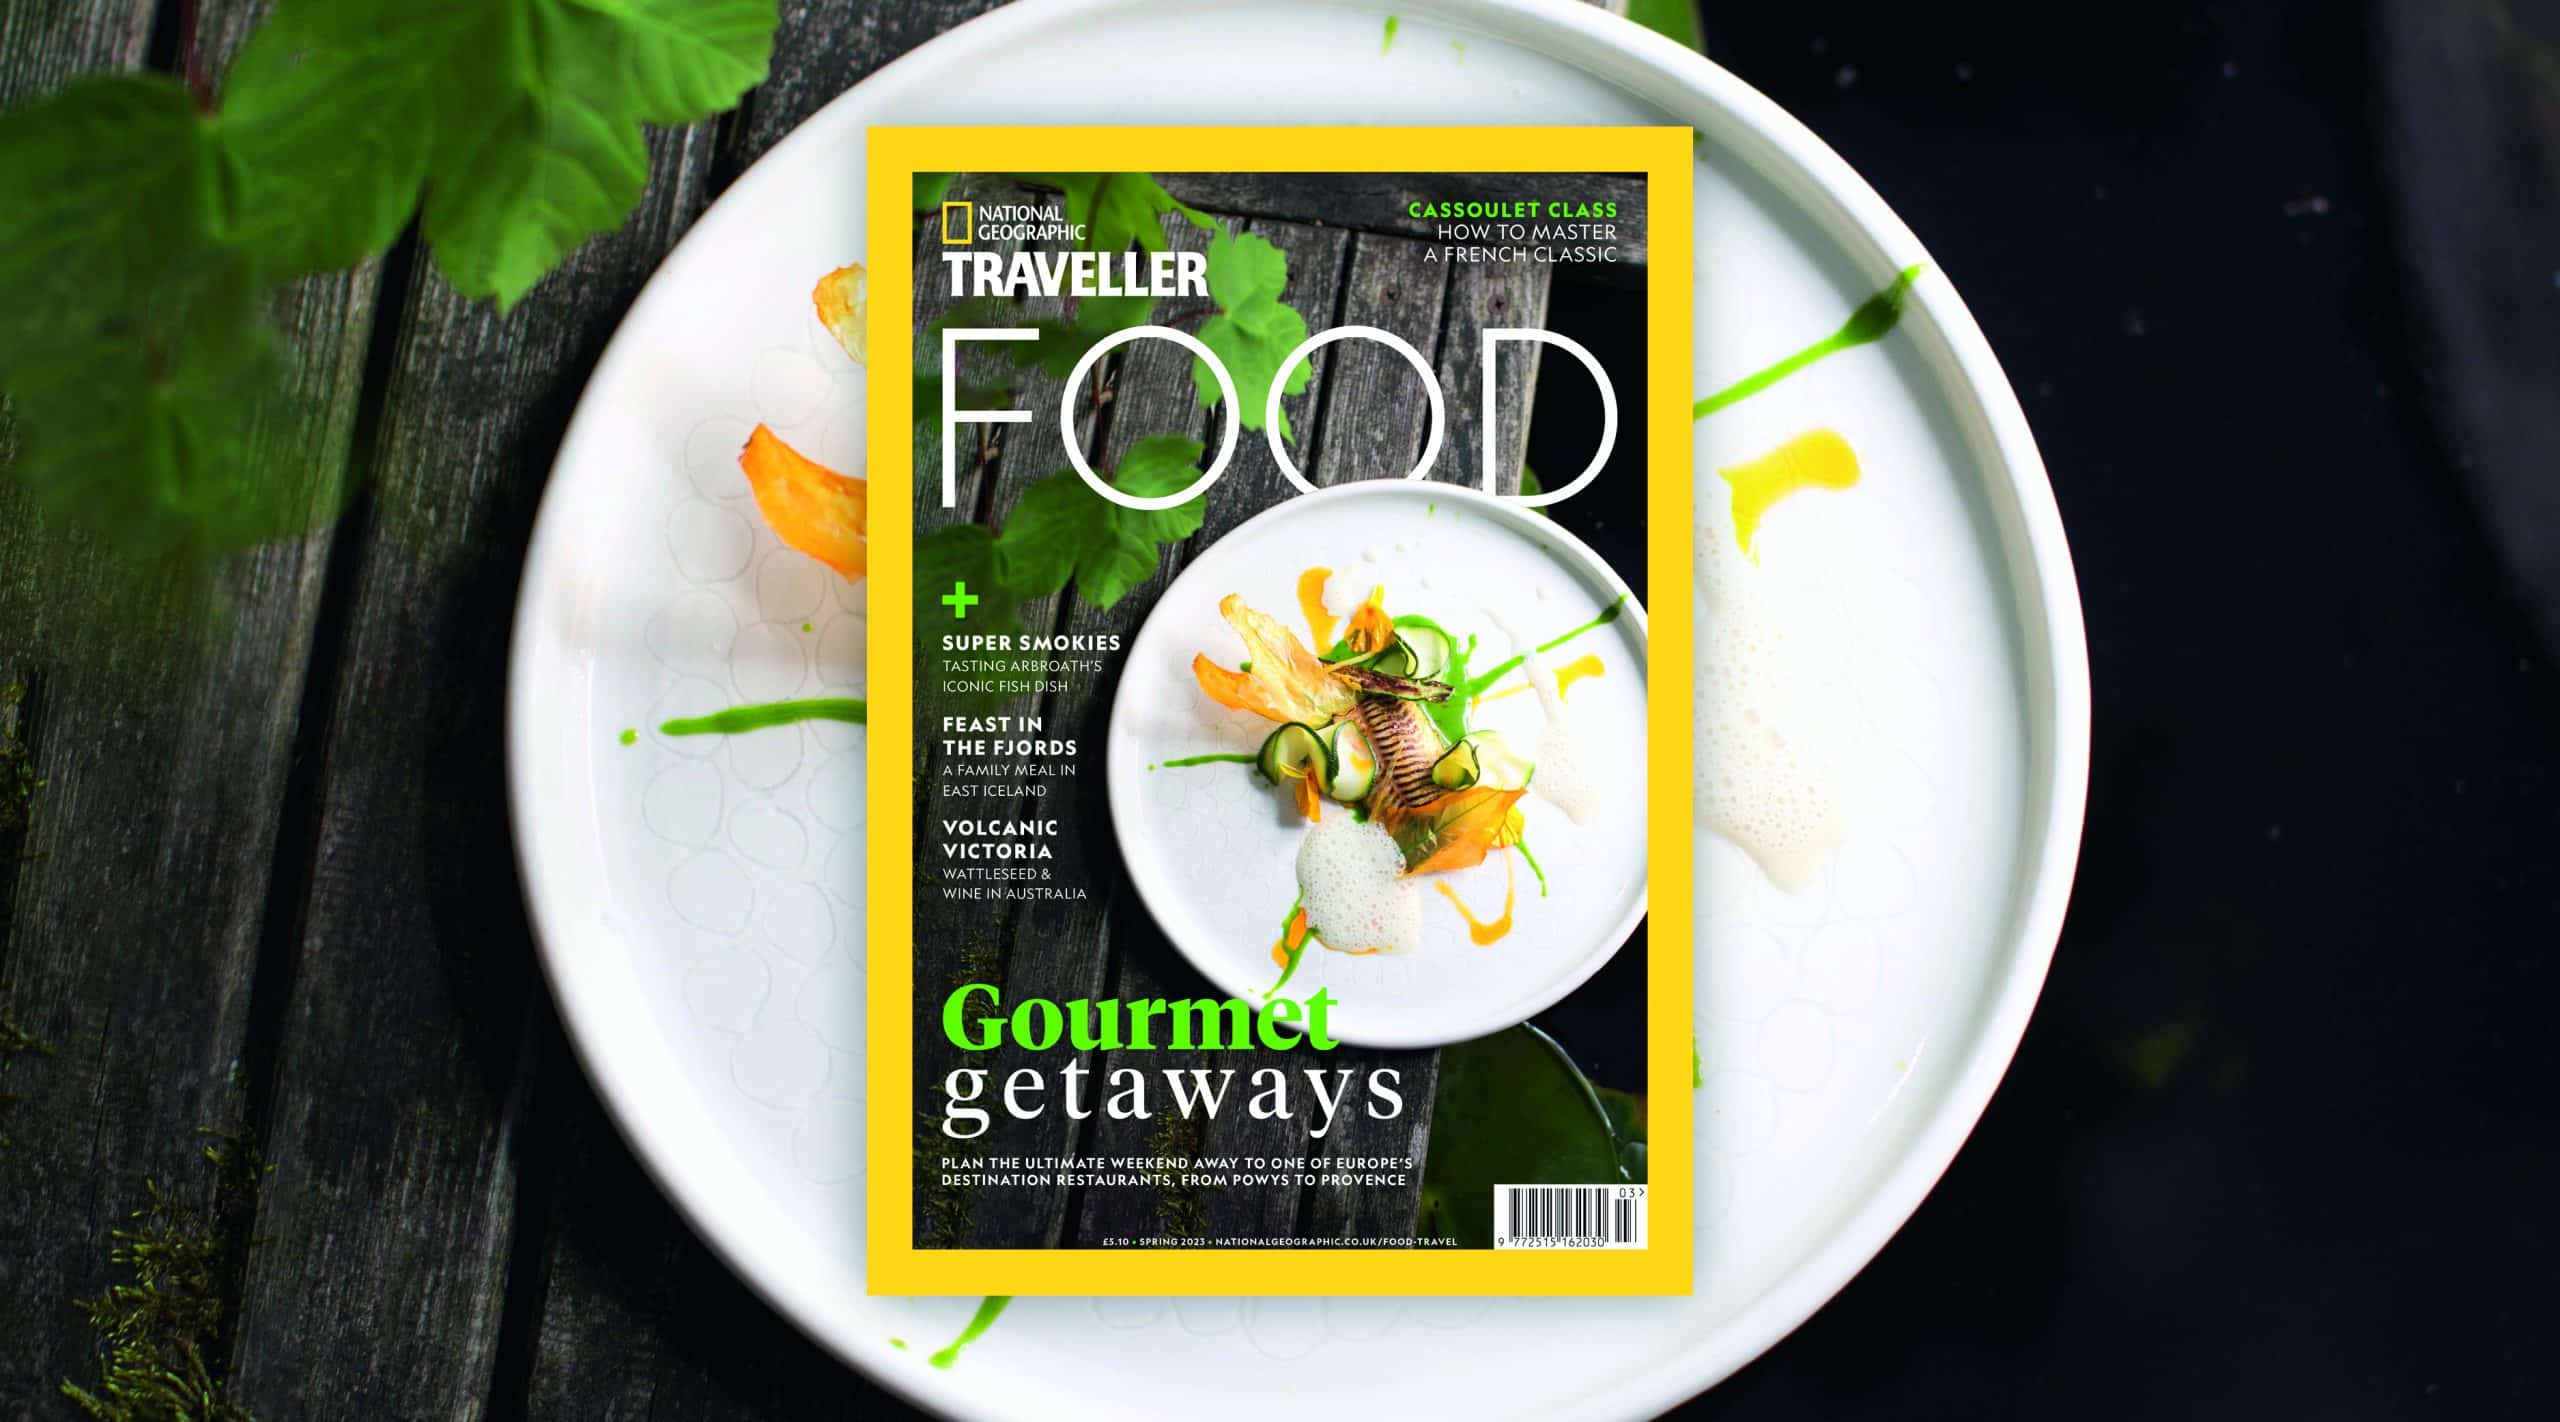 This spring, Food by National Geographic Traveller (UK) is inviting readers to start plotting their dream weekend away, with its pick of Europe’s destination restaurants.